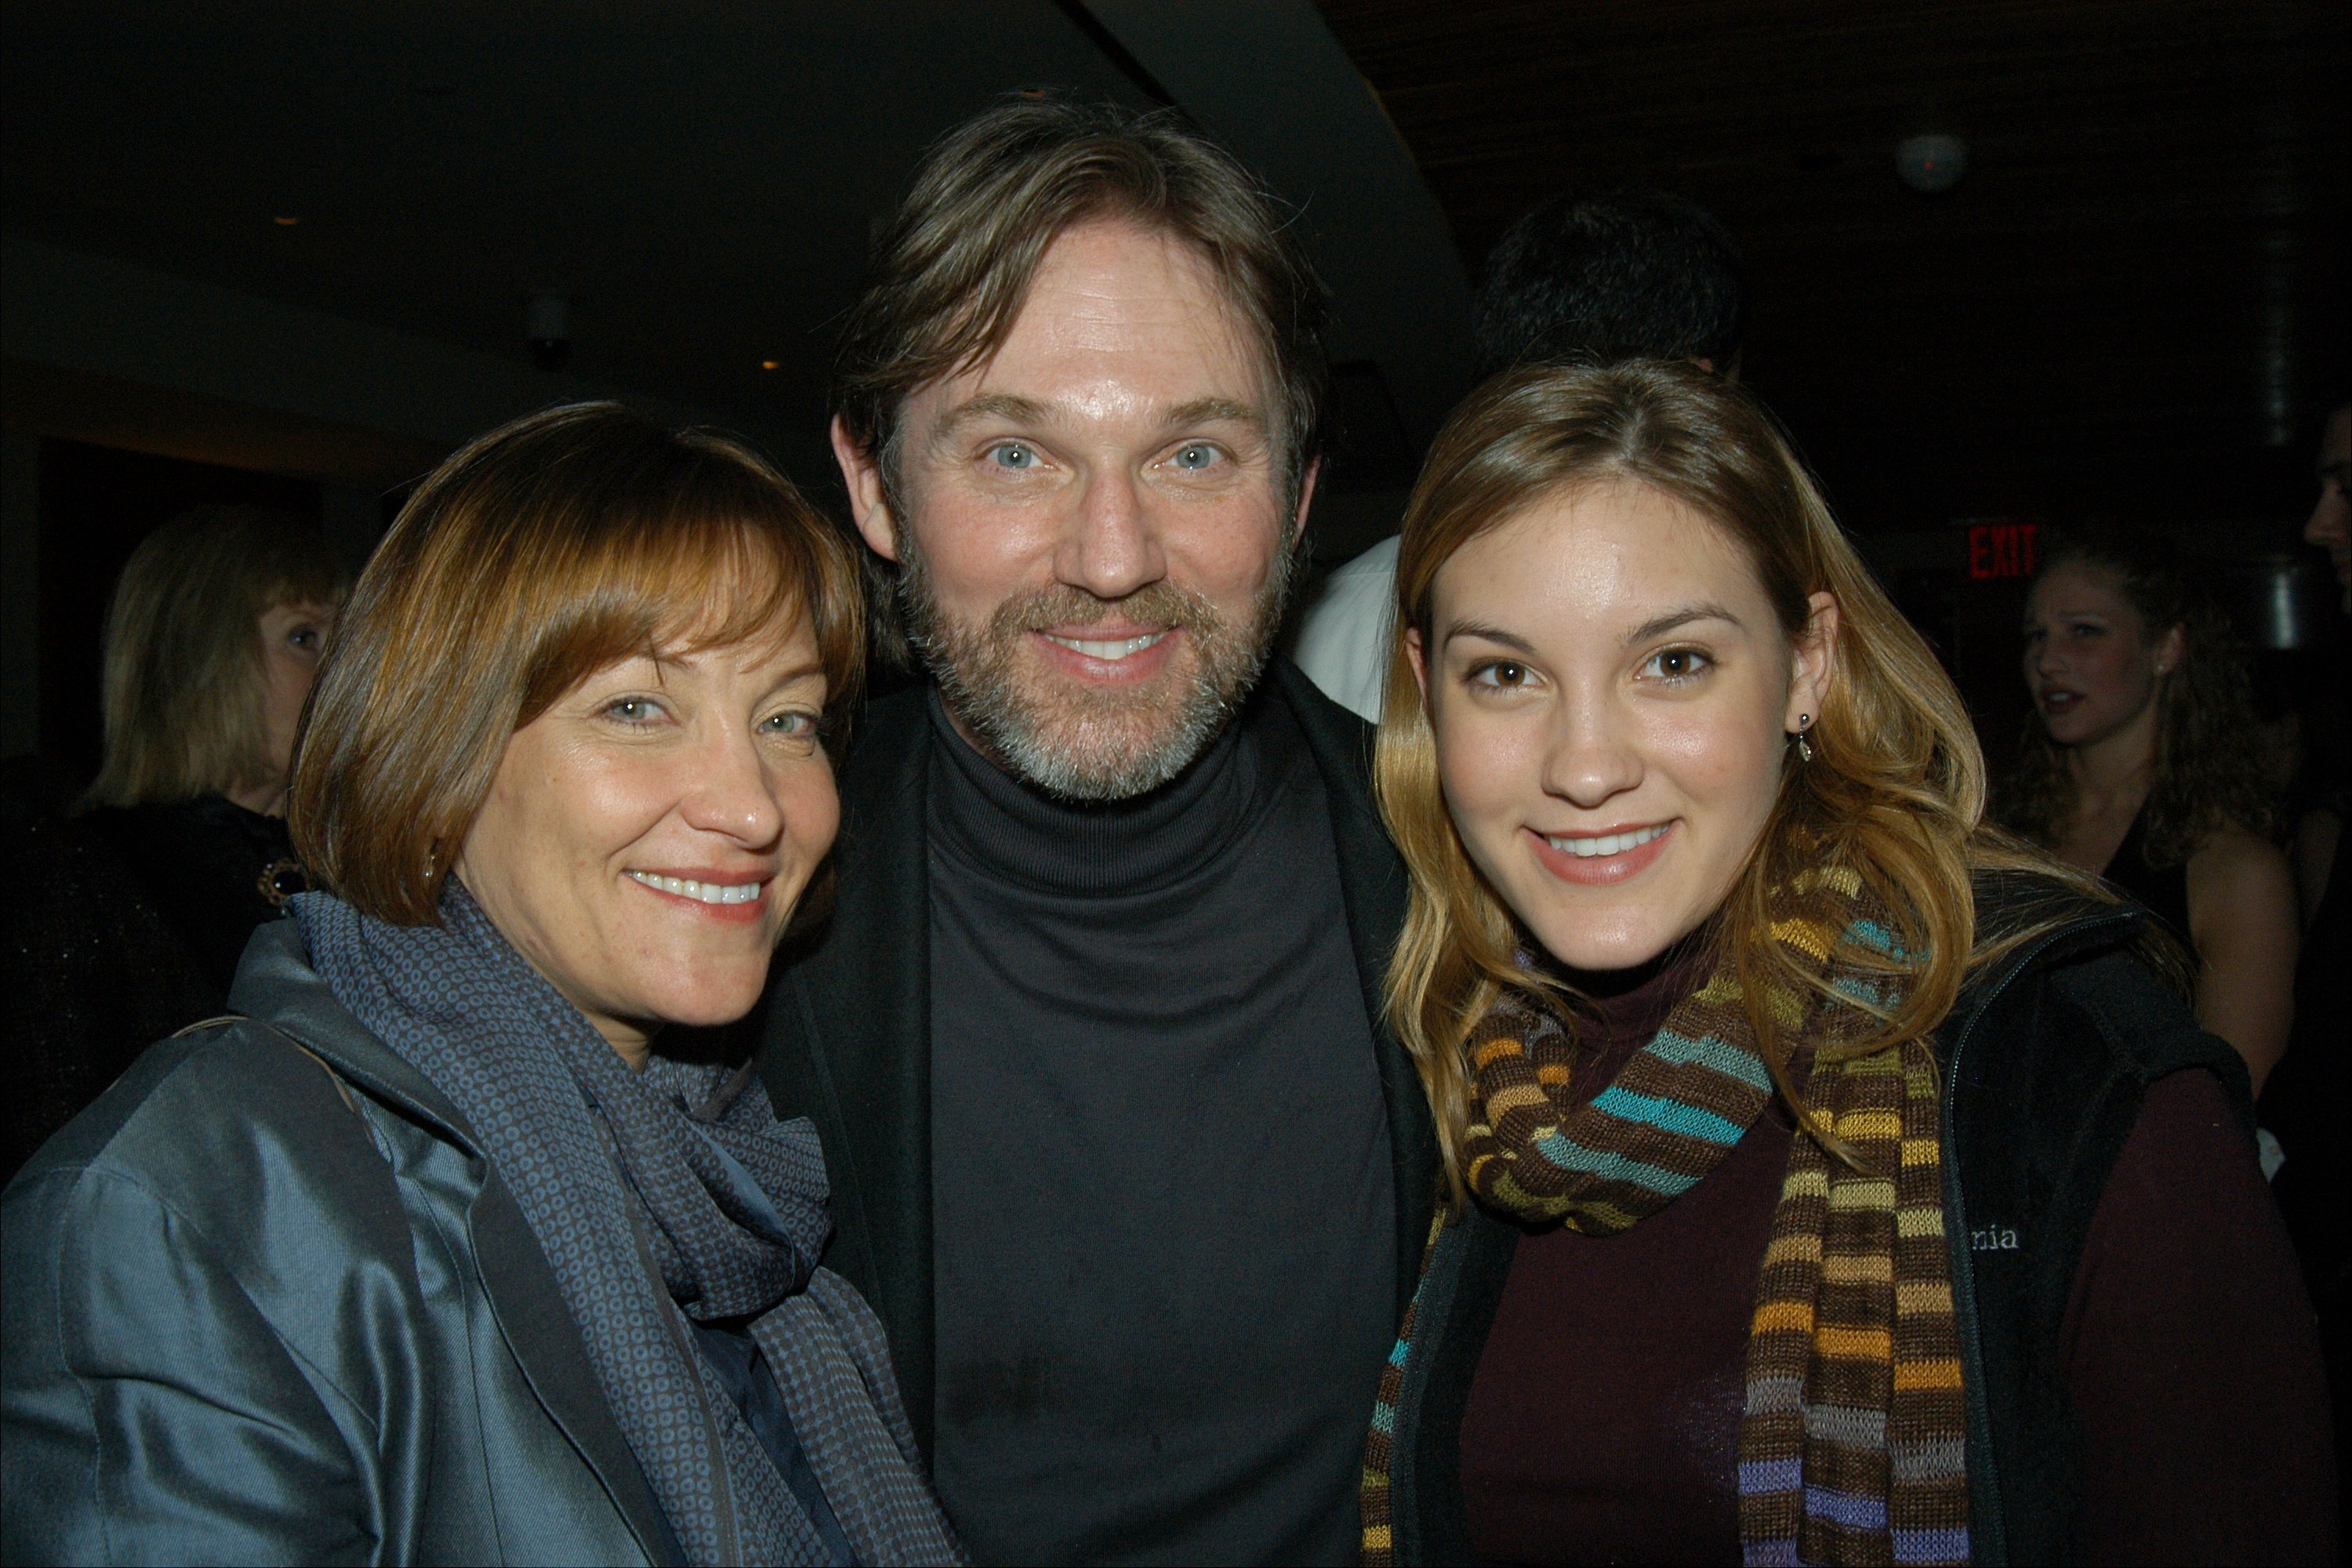 Richard Thomas with his wife Georgiana and daughter Kendra at an opening night party for the play "The Stendhal Syndrome" at Fred's at Barney's on Madison Ave. on February 14 2004 | Source: Getty Images